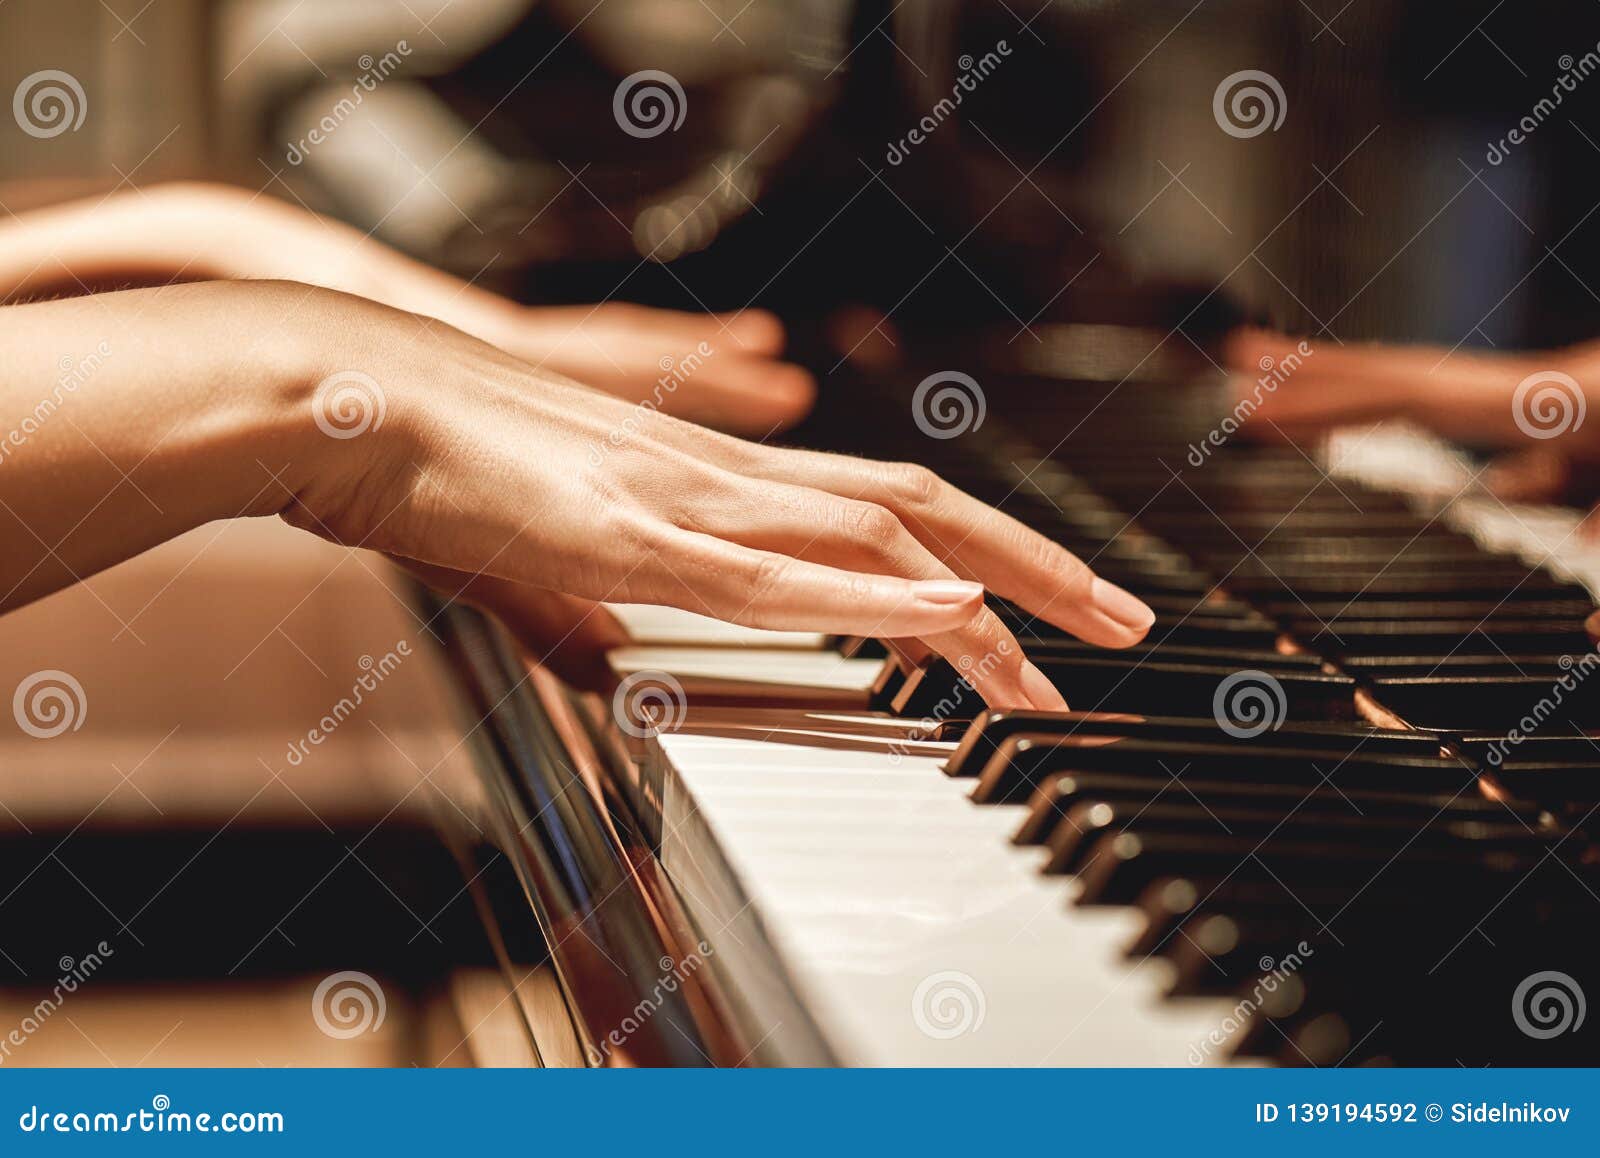 favorite classical music...close up view of gentle female hands playing a melody on piano while taking piano lessons